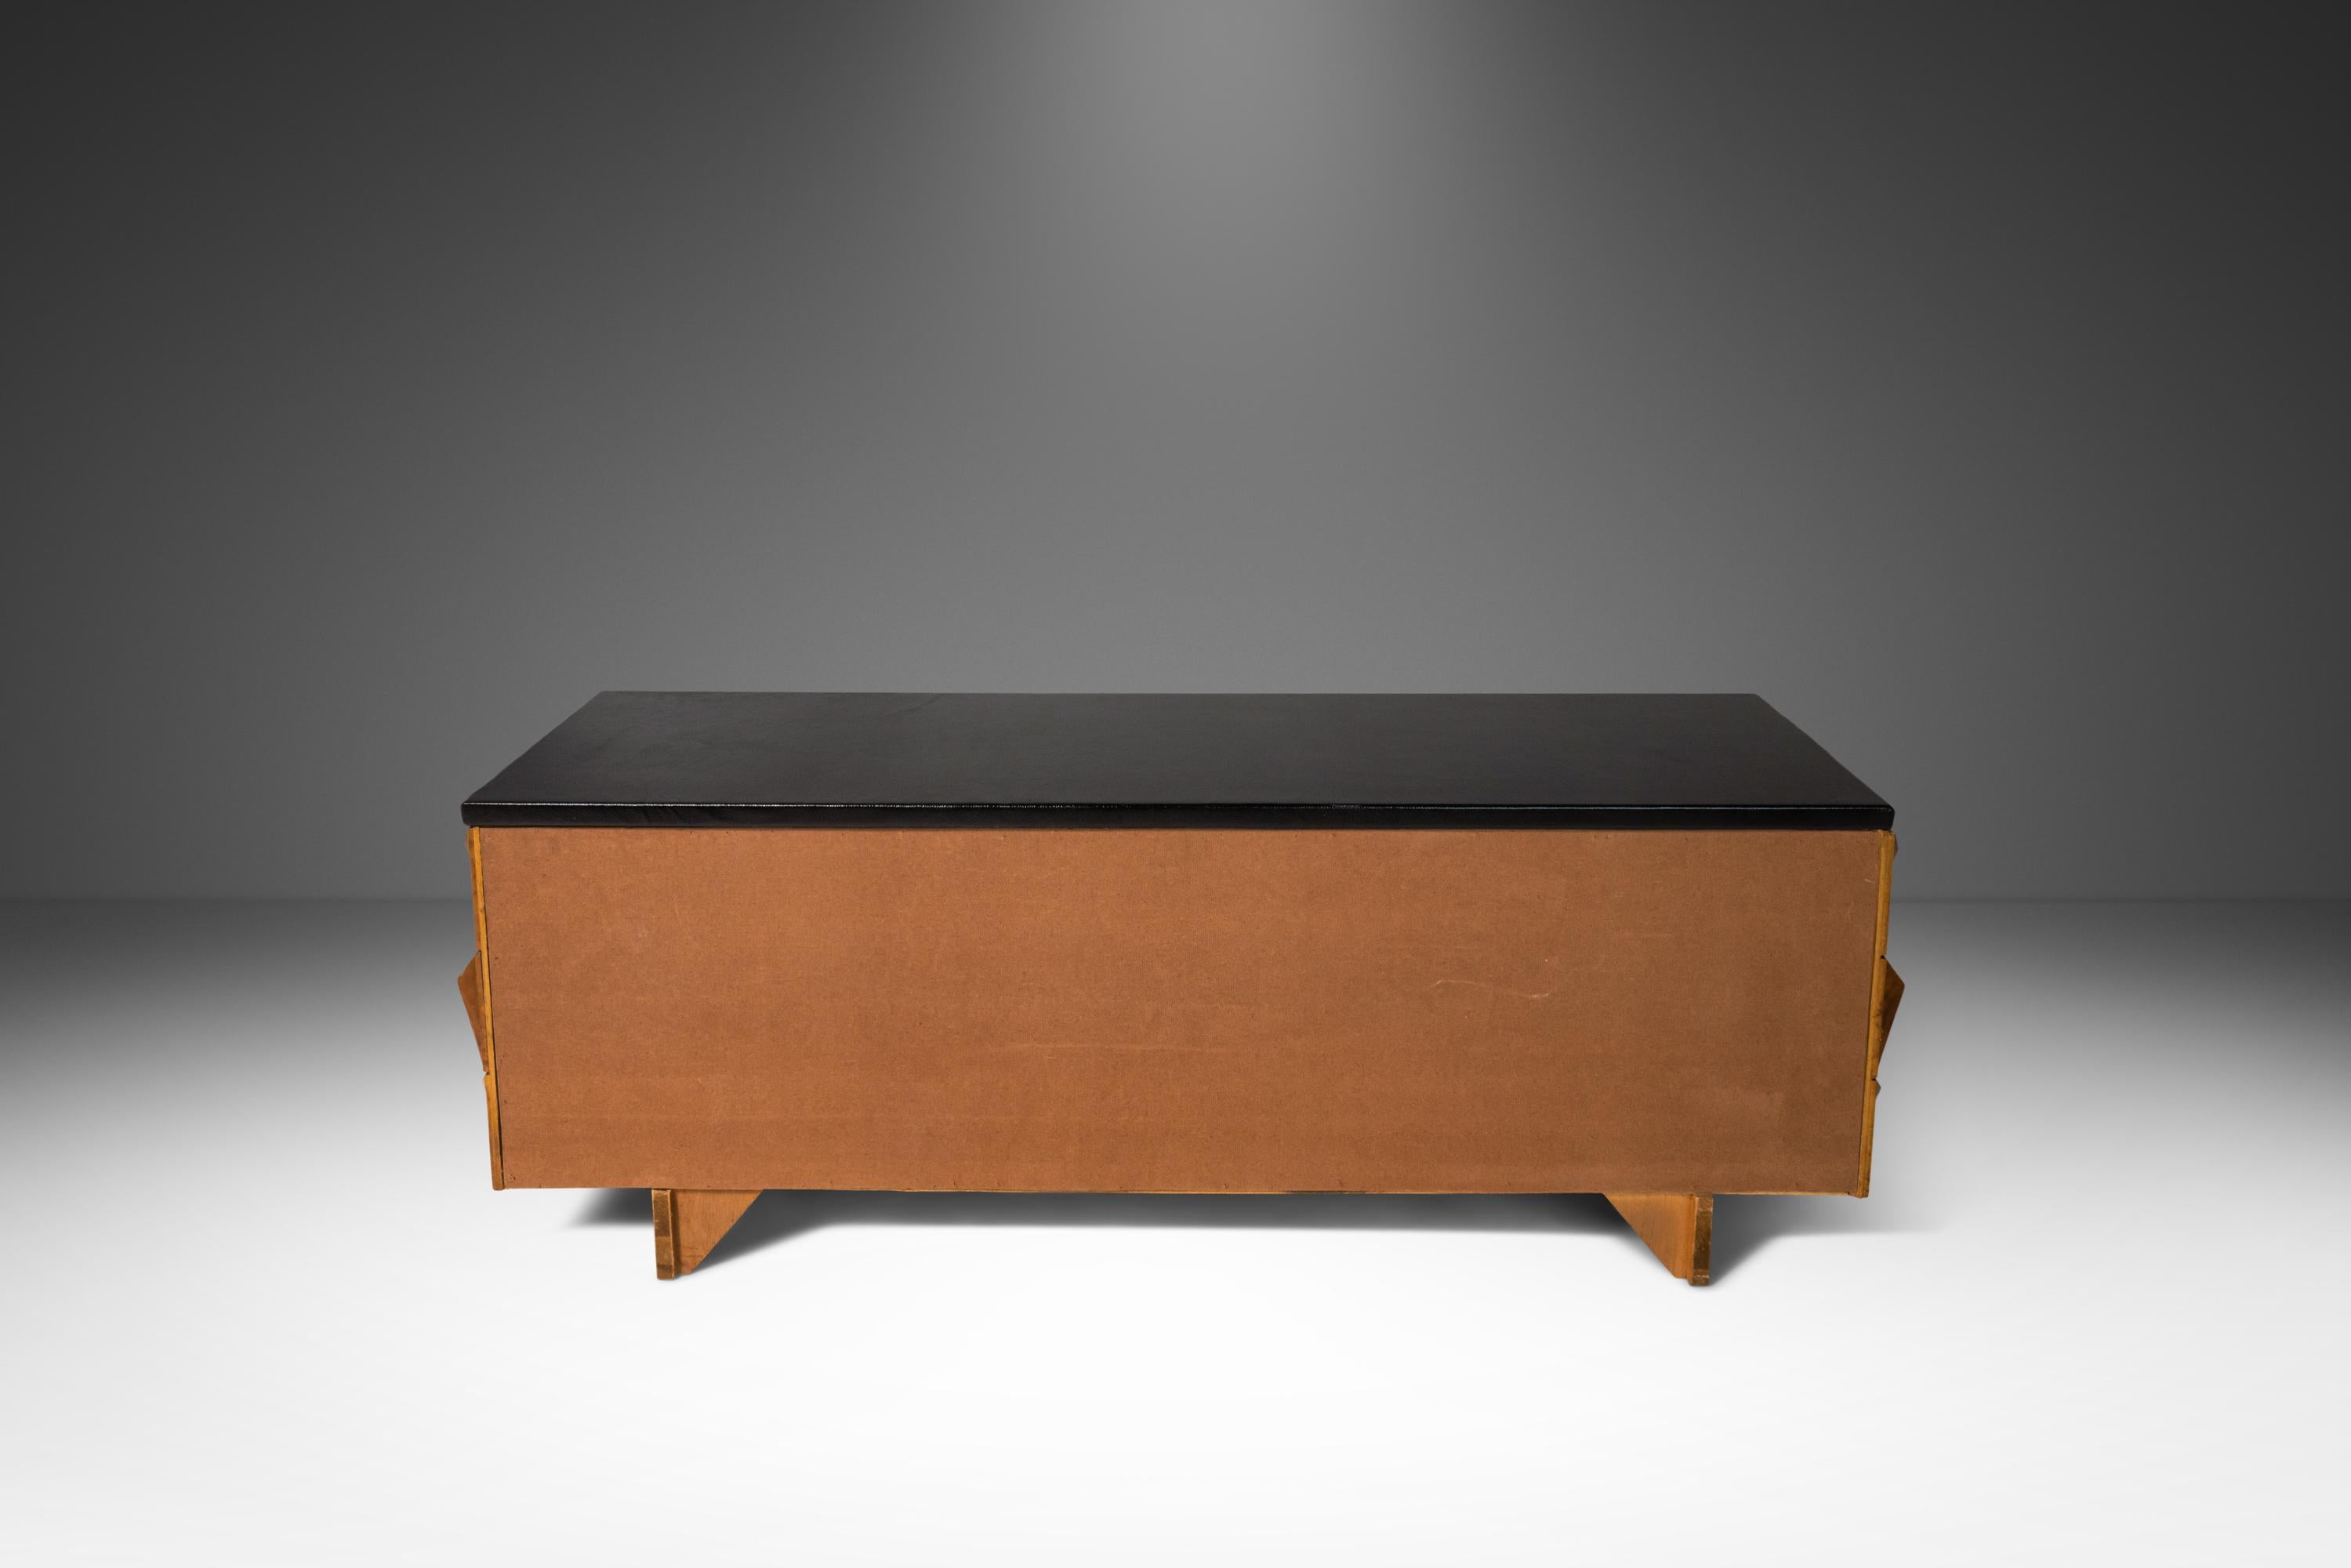 Brutalist Sculptural Diamond Faced Credenza / Sideboard With Leather Top, 1970's 1